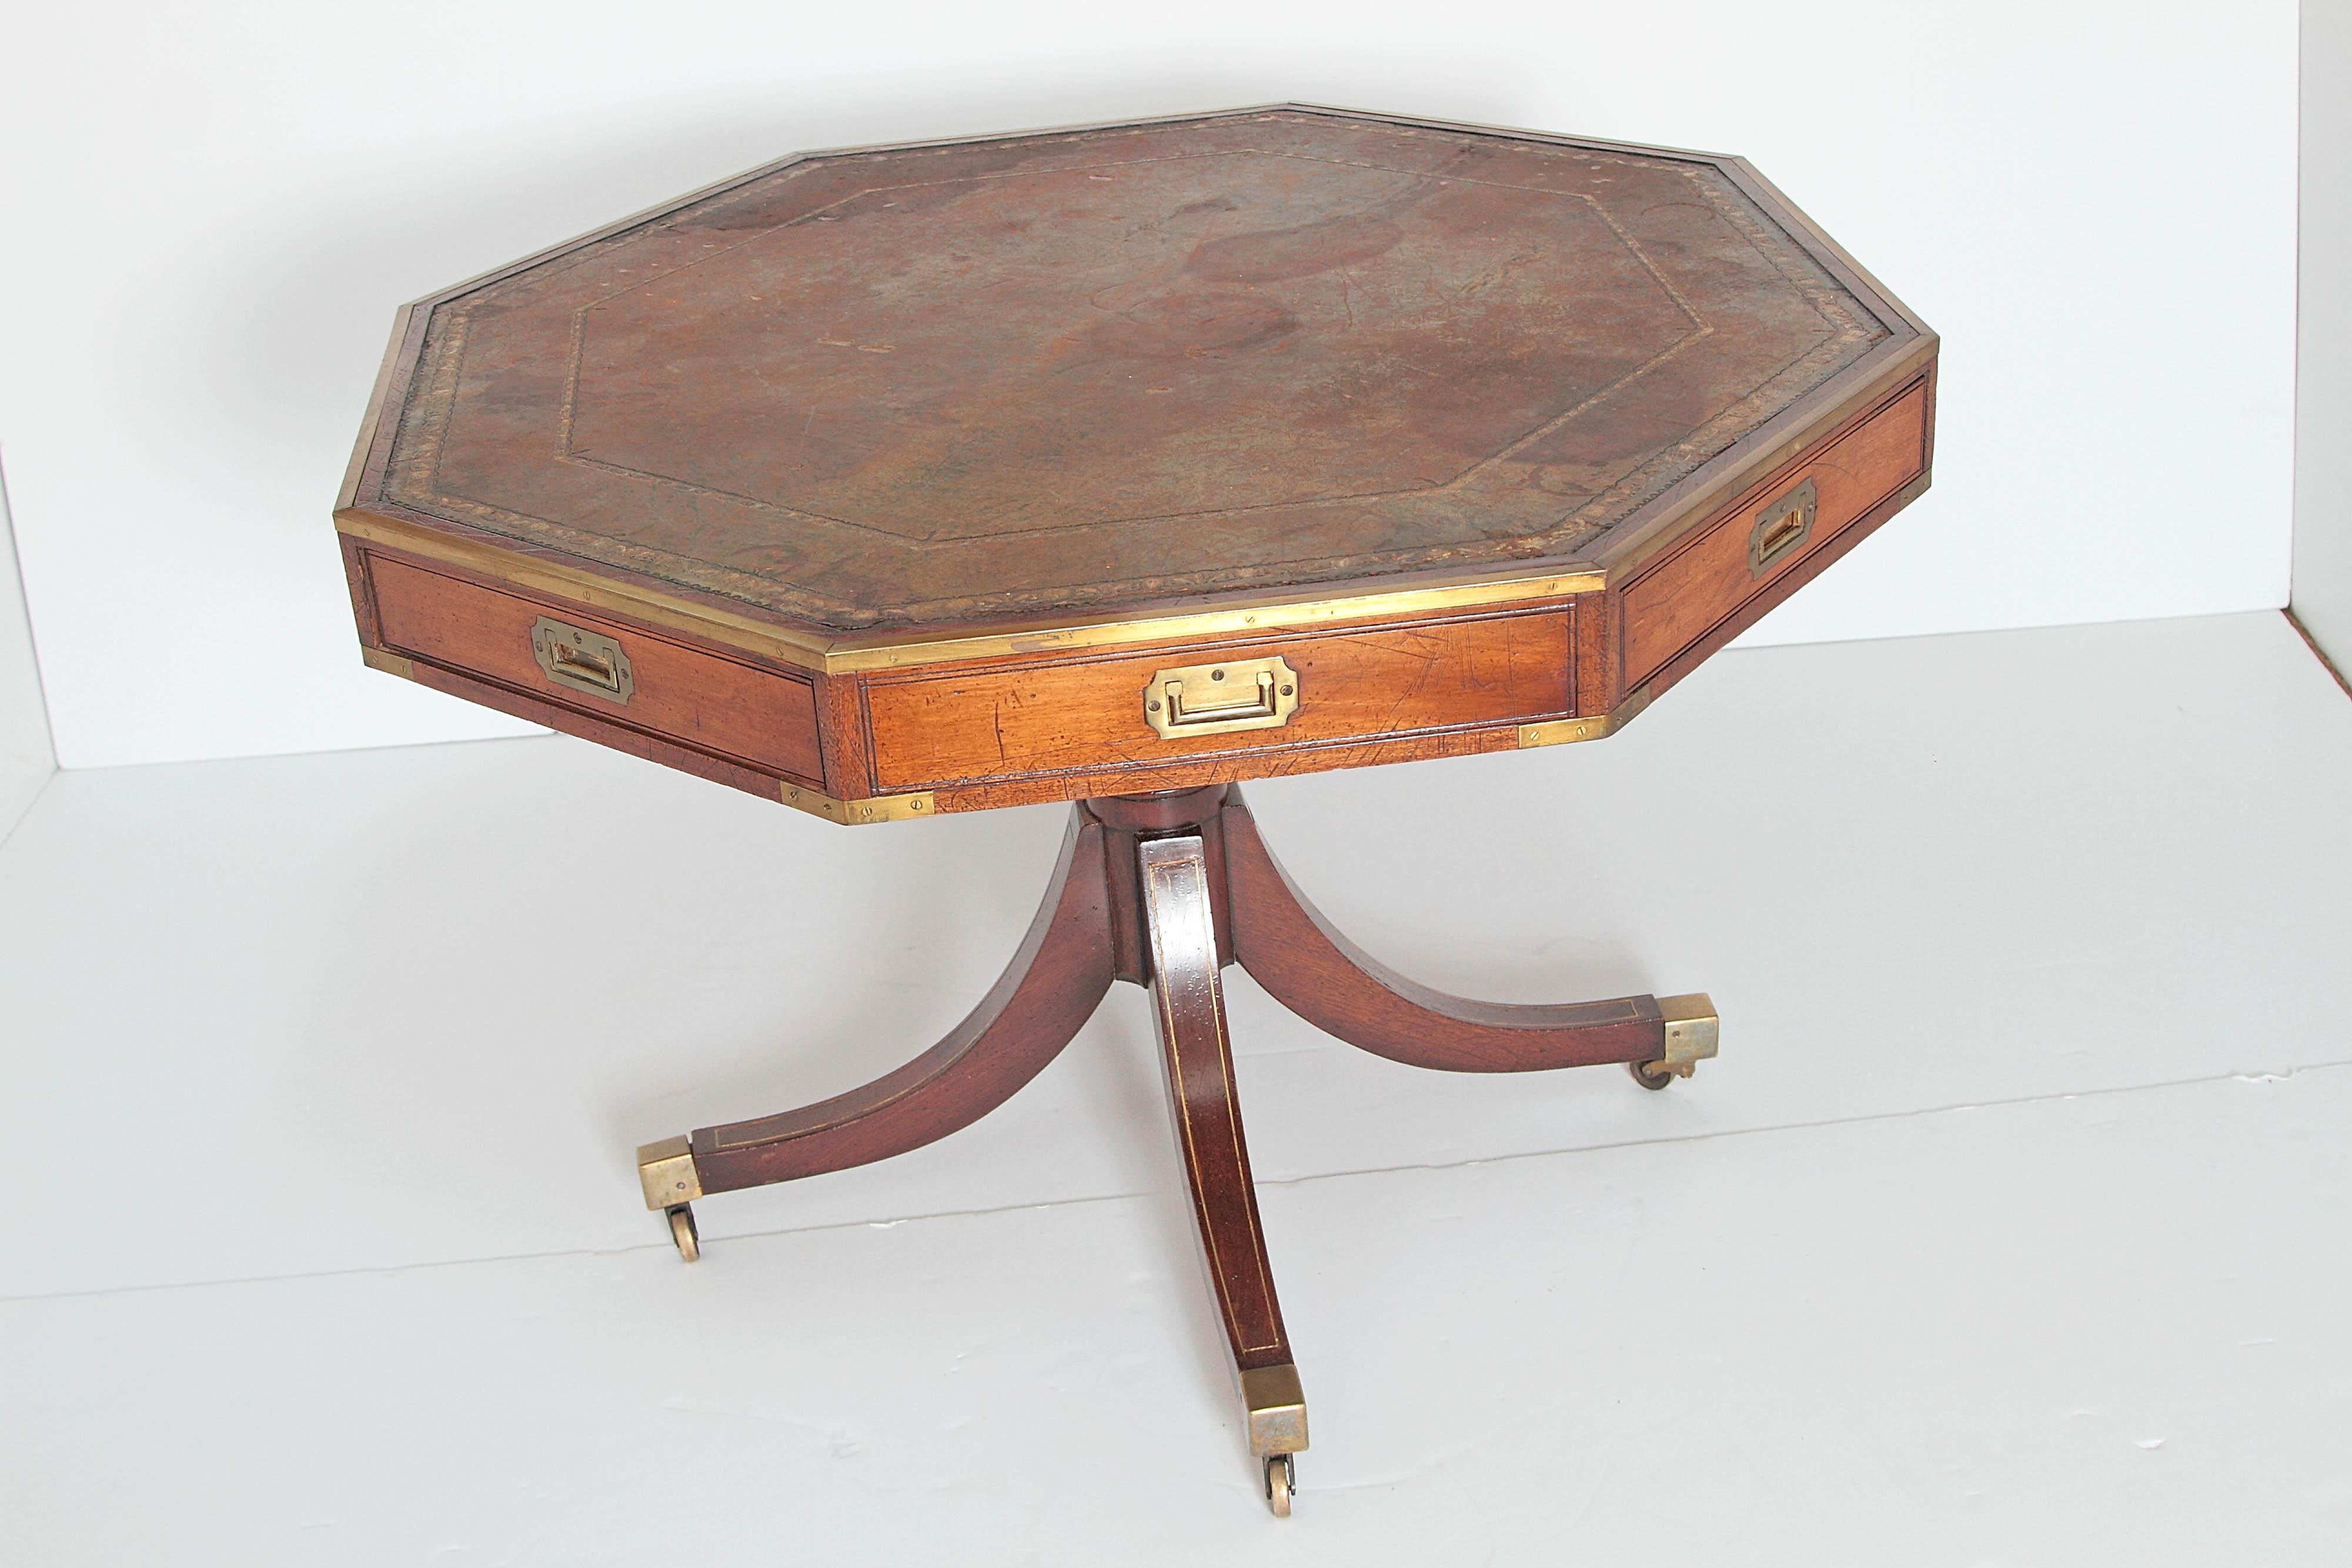 A handsome Regency mahogany drum table, octagonal not round, with distressed / 